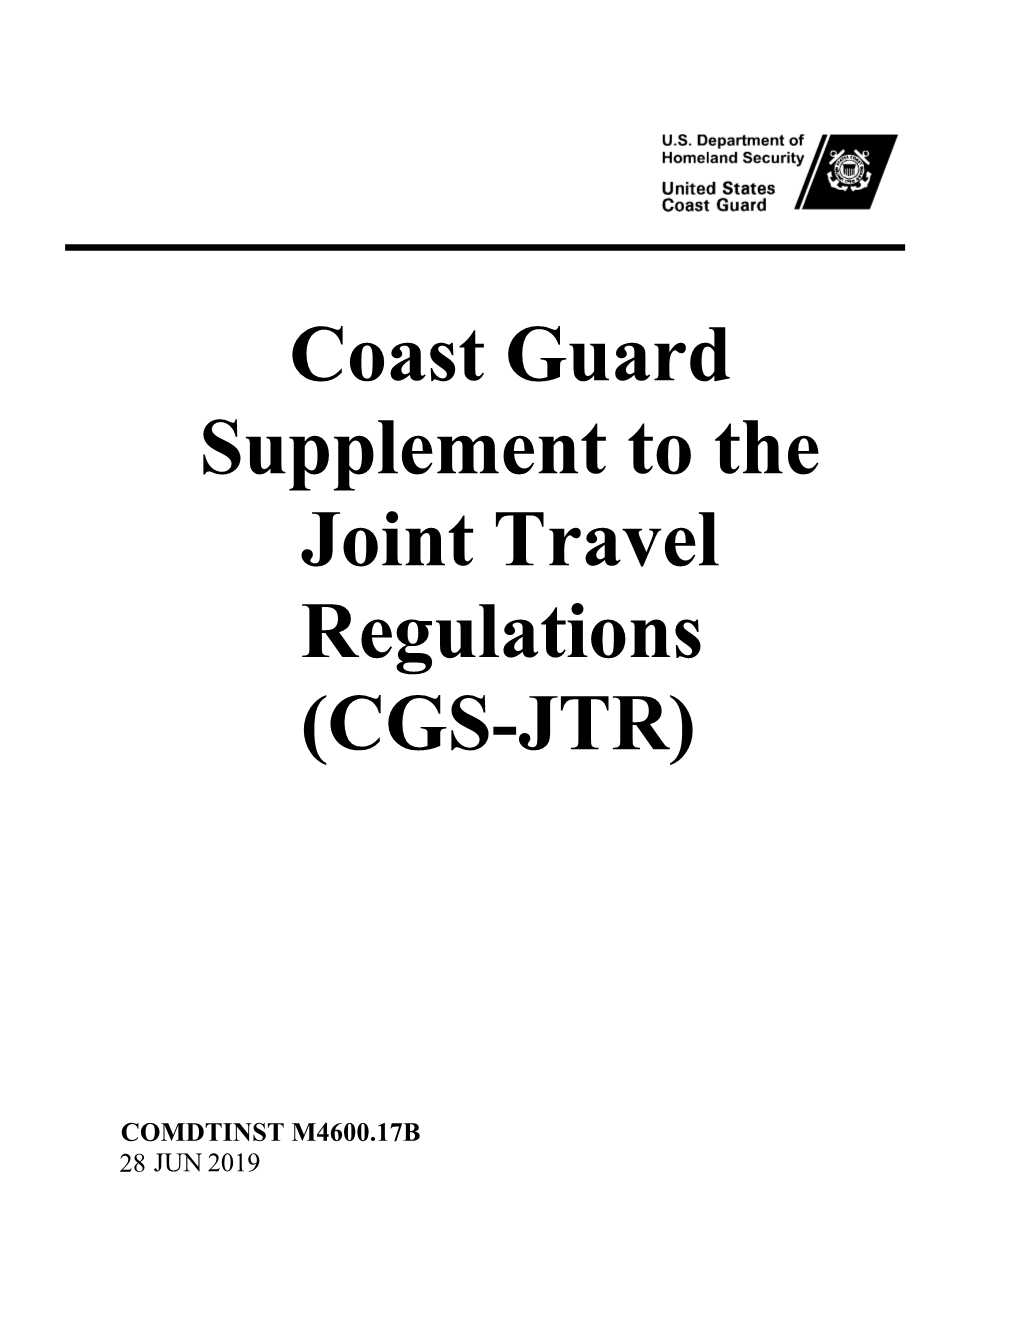 Coast Guard Supplement to the Joint Travel Regulations (CGS-JTR)